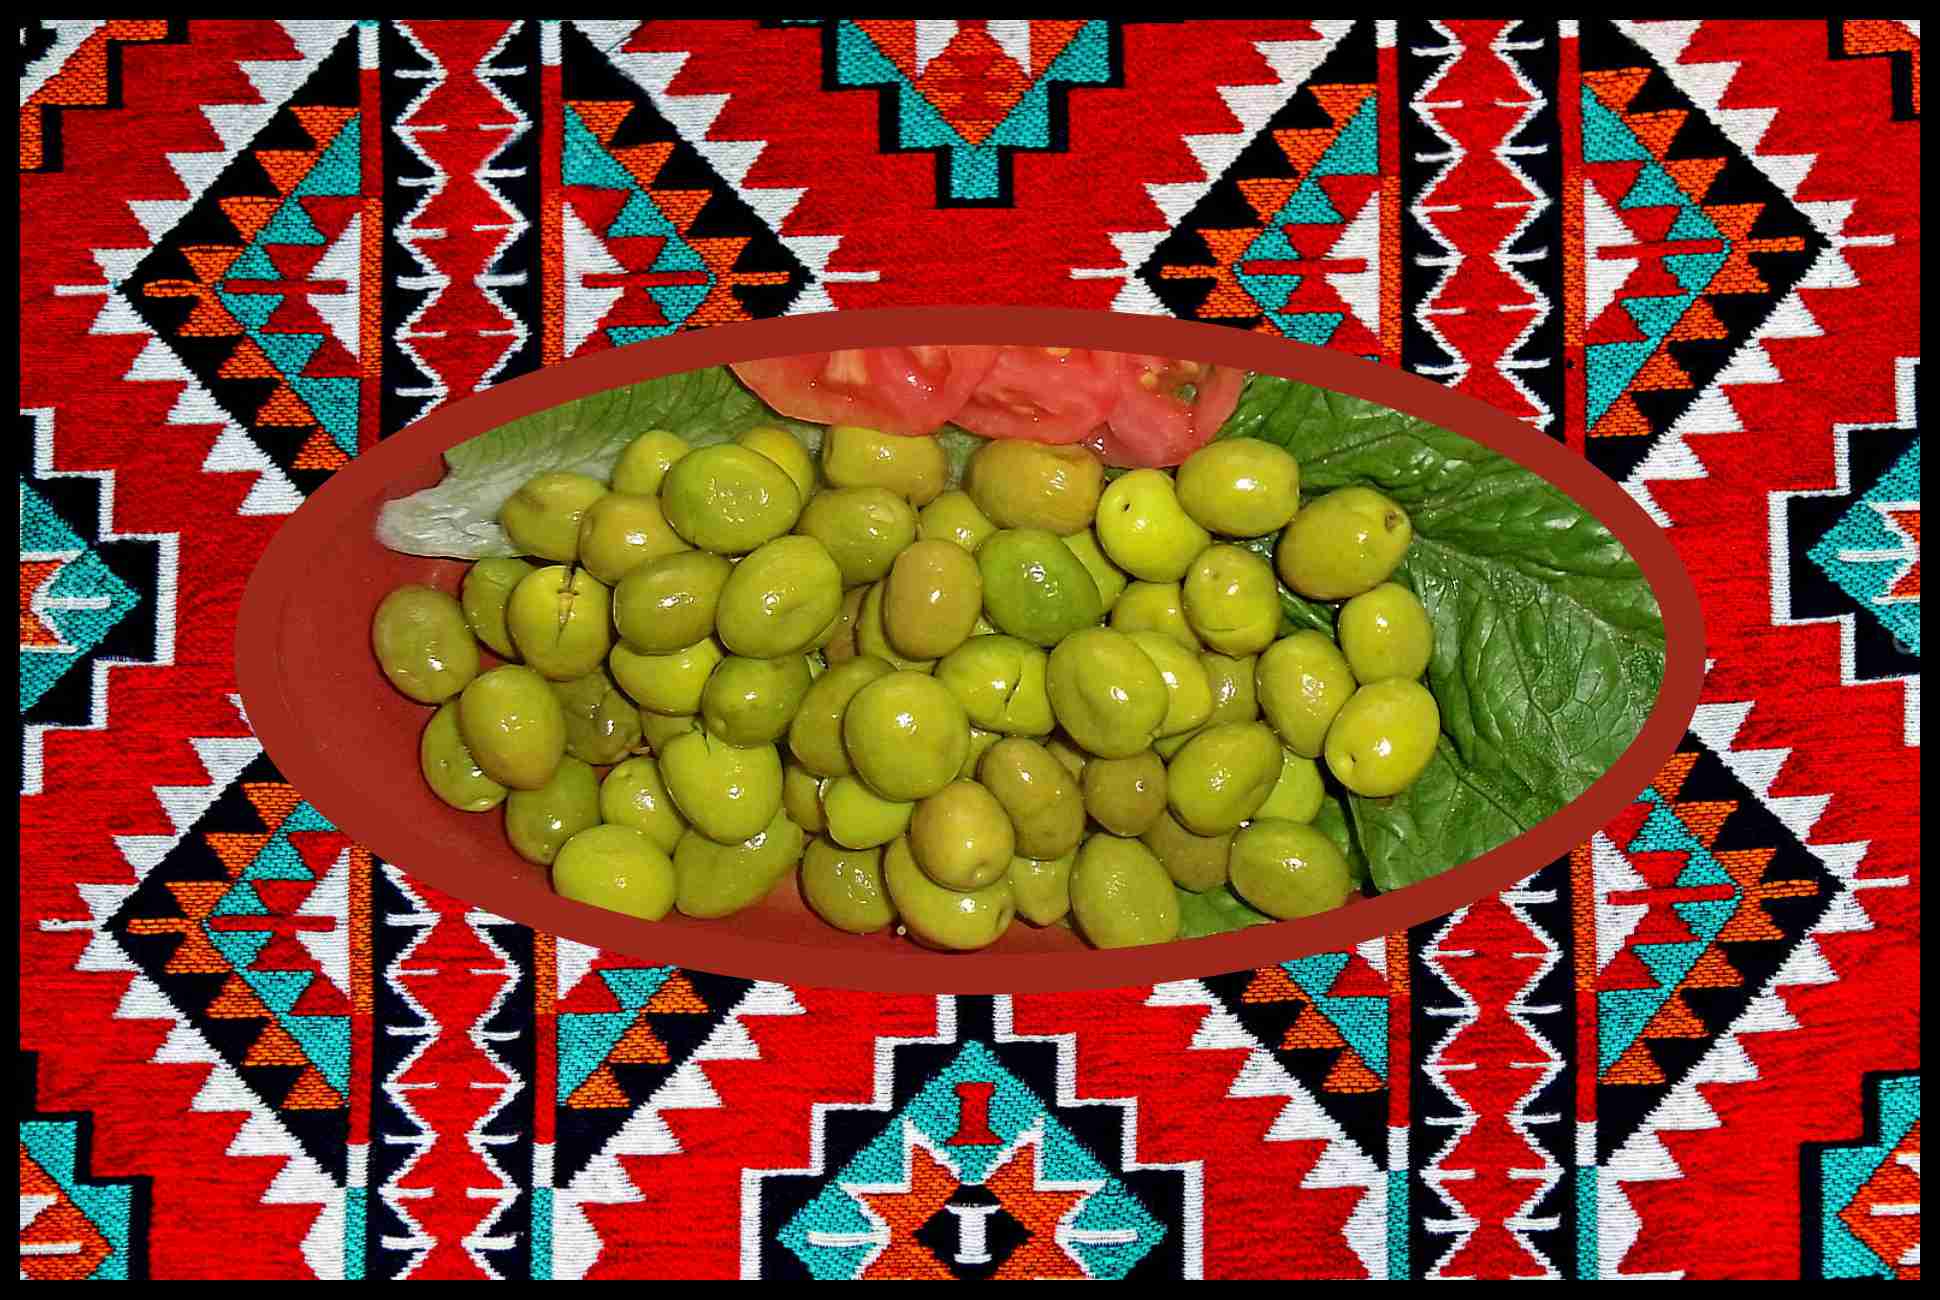 Olive Plate; My Mom's Recipe; Petra Culinary; Mediterranean Delights; Olive Assortment; Gourmet Olive Selection; Petra Dining; Artisanal Olive Platter; Culinary Excellence; Savory Olive Experience; Exquisite Ingredients; Petra Specialties; Culinary Adventure; Unique Olive Variety; Flavorful Olive Tasting; Best Olives in Petra; Palate Pleasers; Petra's Olive Medley; Locally-Sourced Olives; Olive Lover's Paradise; Gourmet Exploration; Fine Dining; Petra's Culinary Scene; Olive Tasting Plate; Gastronomic Delight.